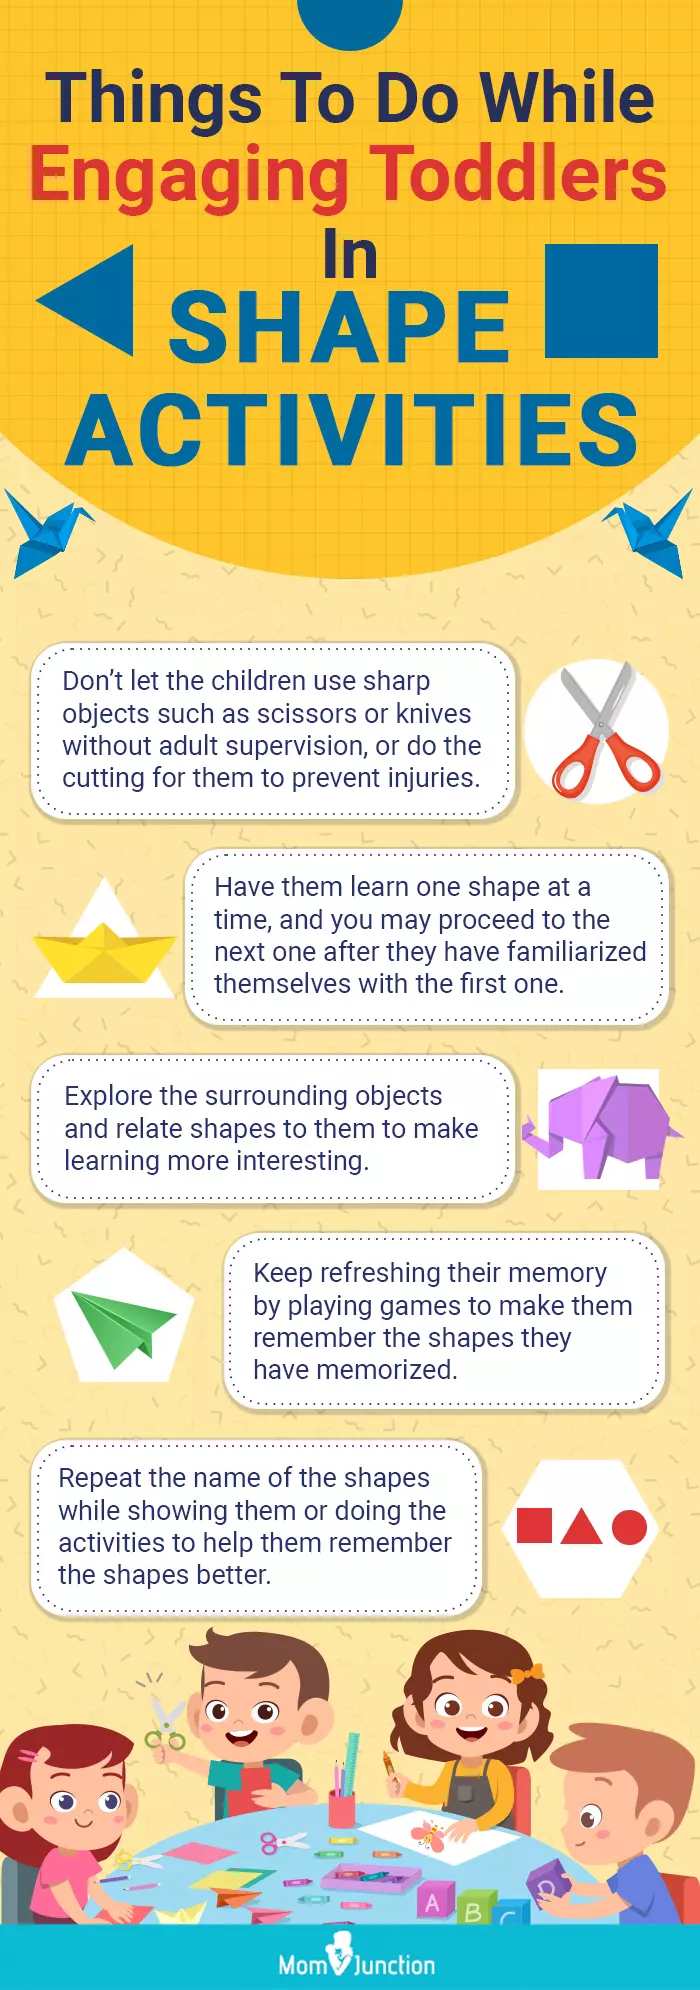 things to do while engaging toddlers in shape activities (infographic)